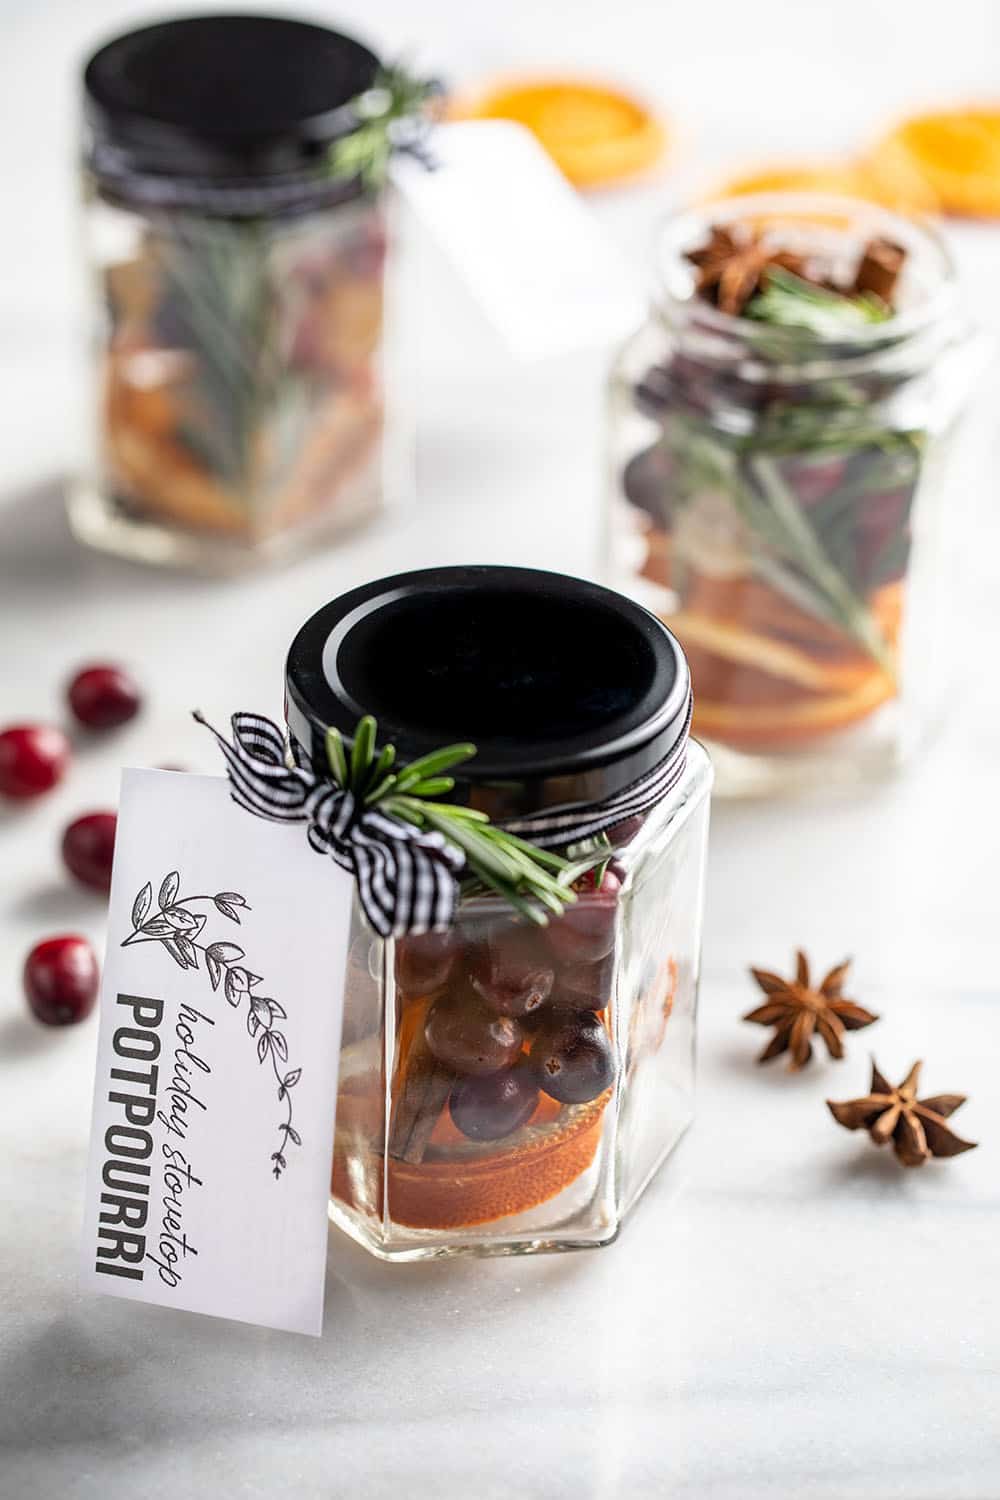 Holiday Stovetop Potpourri (with Printable Gift Tags!) My Baking